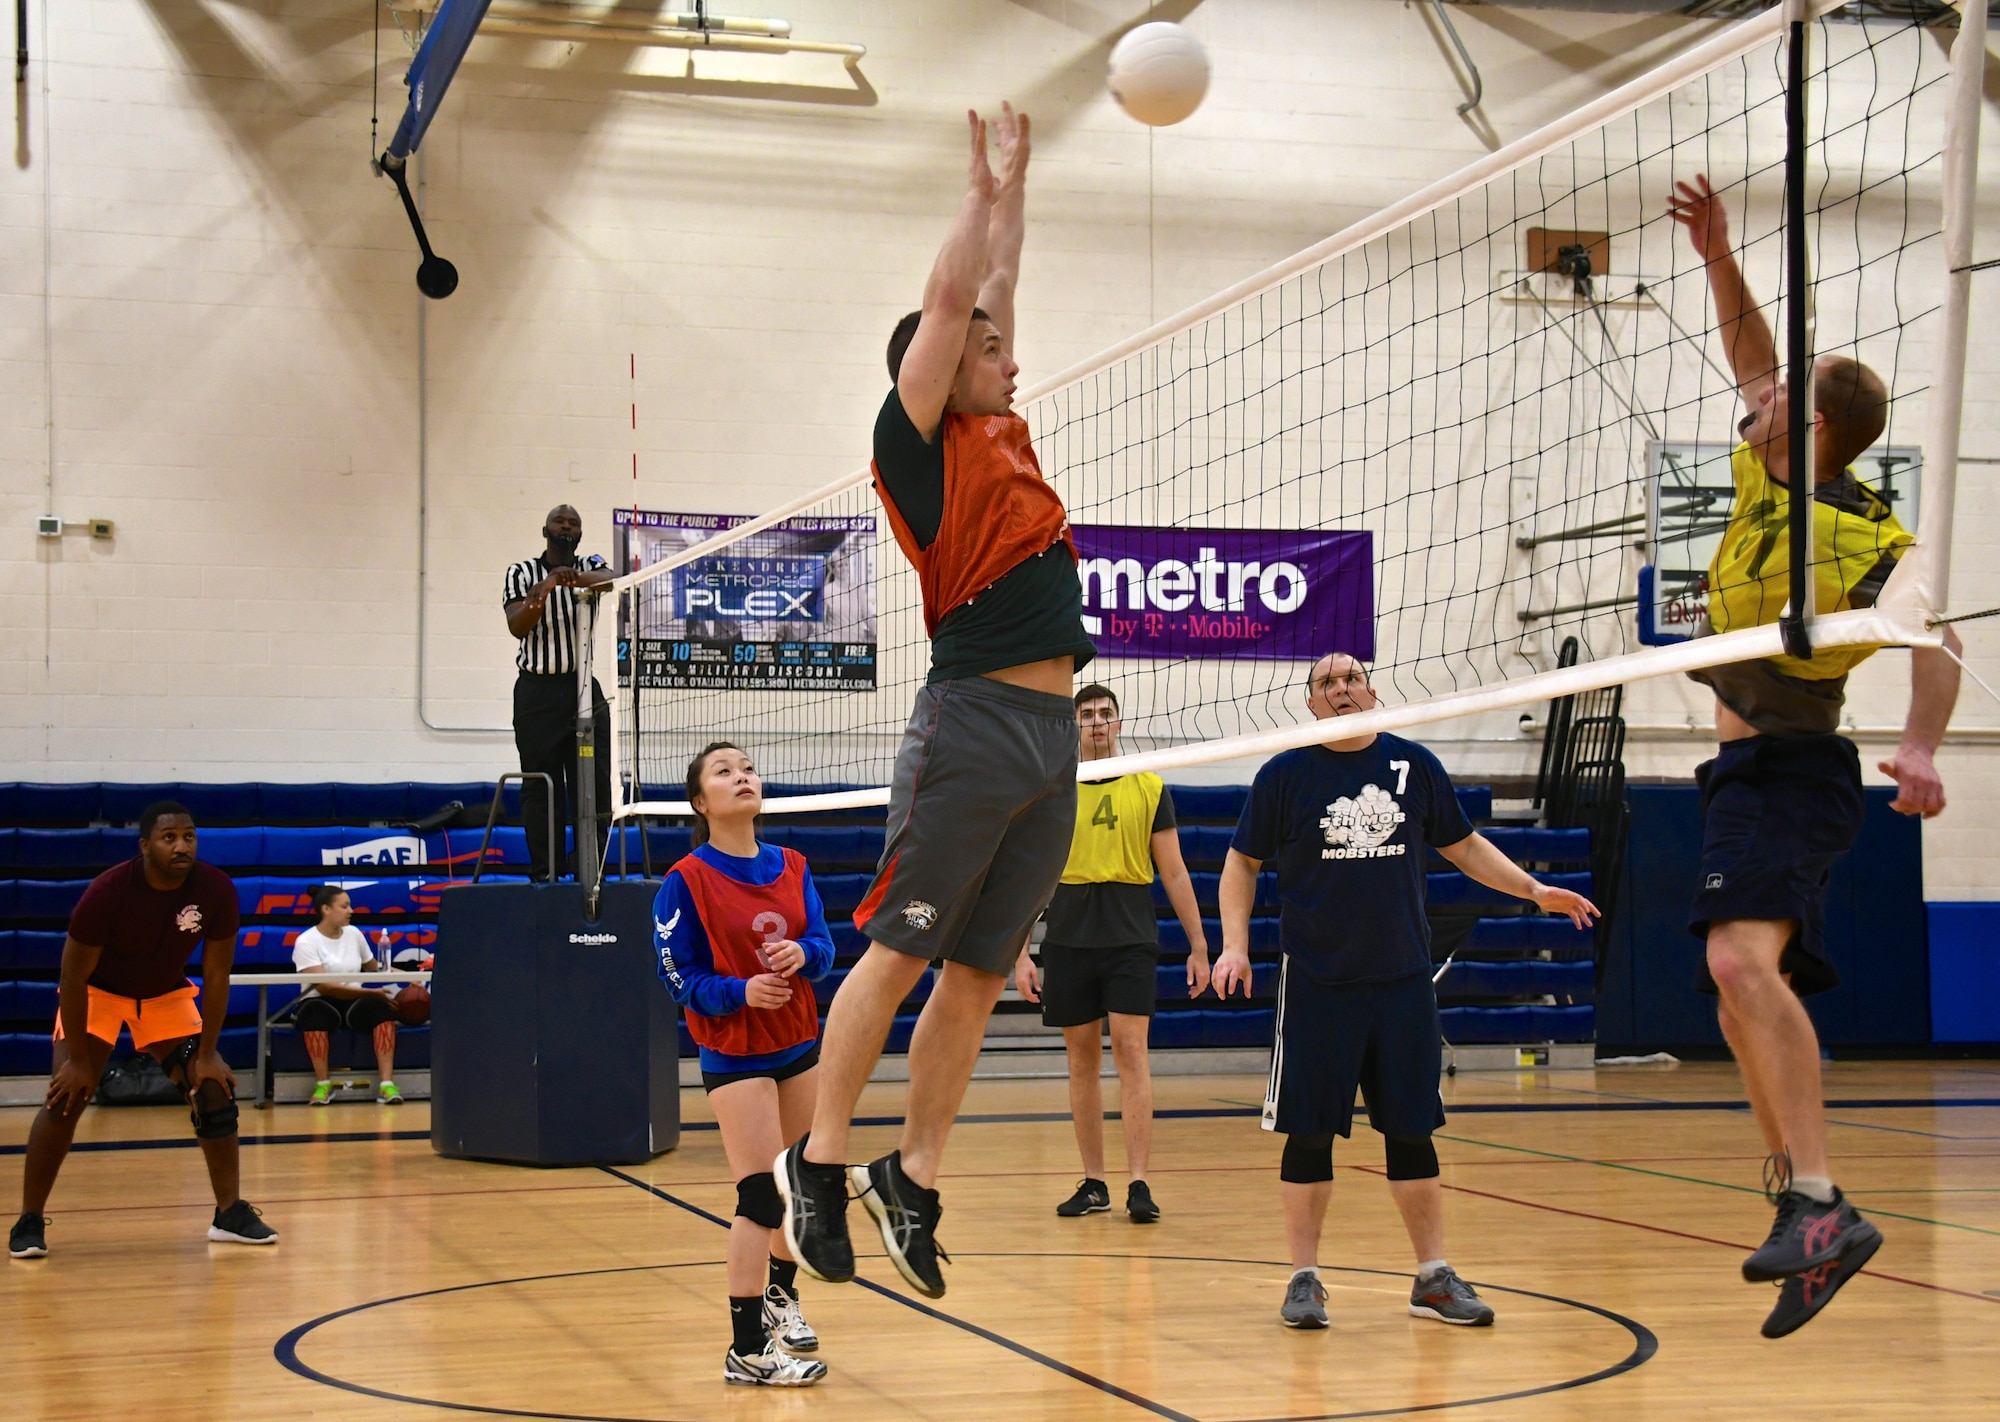 Staff Sgt. Tyler Hambidge, 932nd Medical Squadron, blocks the volleyball back over the net during recent intramural competition at Scott Air Force Base, Ill.  The 932nd Airlift Wing has volunteers participating in a variety of  sports throughout the year, to include volleyball and summer softball.  (U.S. Air Force photo by Lt. Col. Stan Paregien)